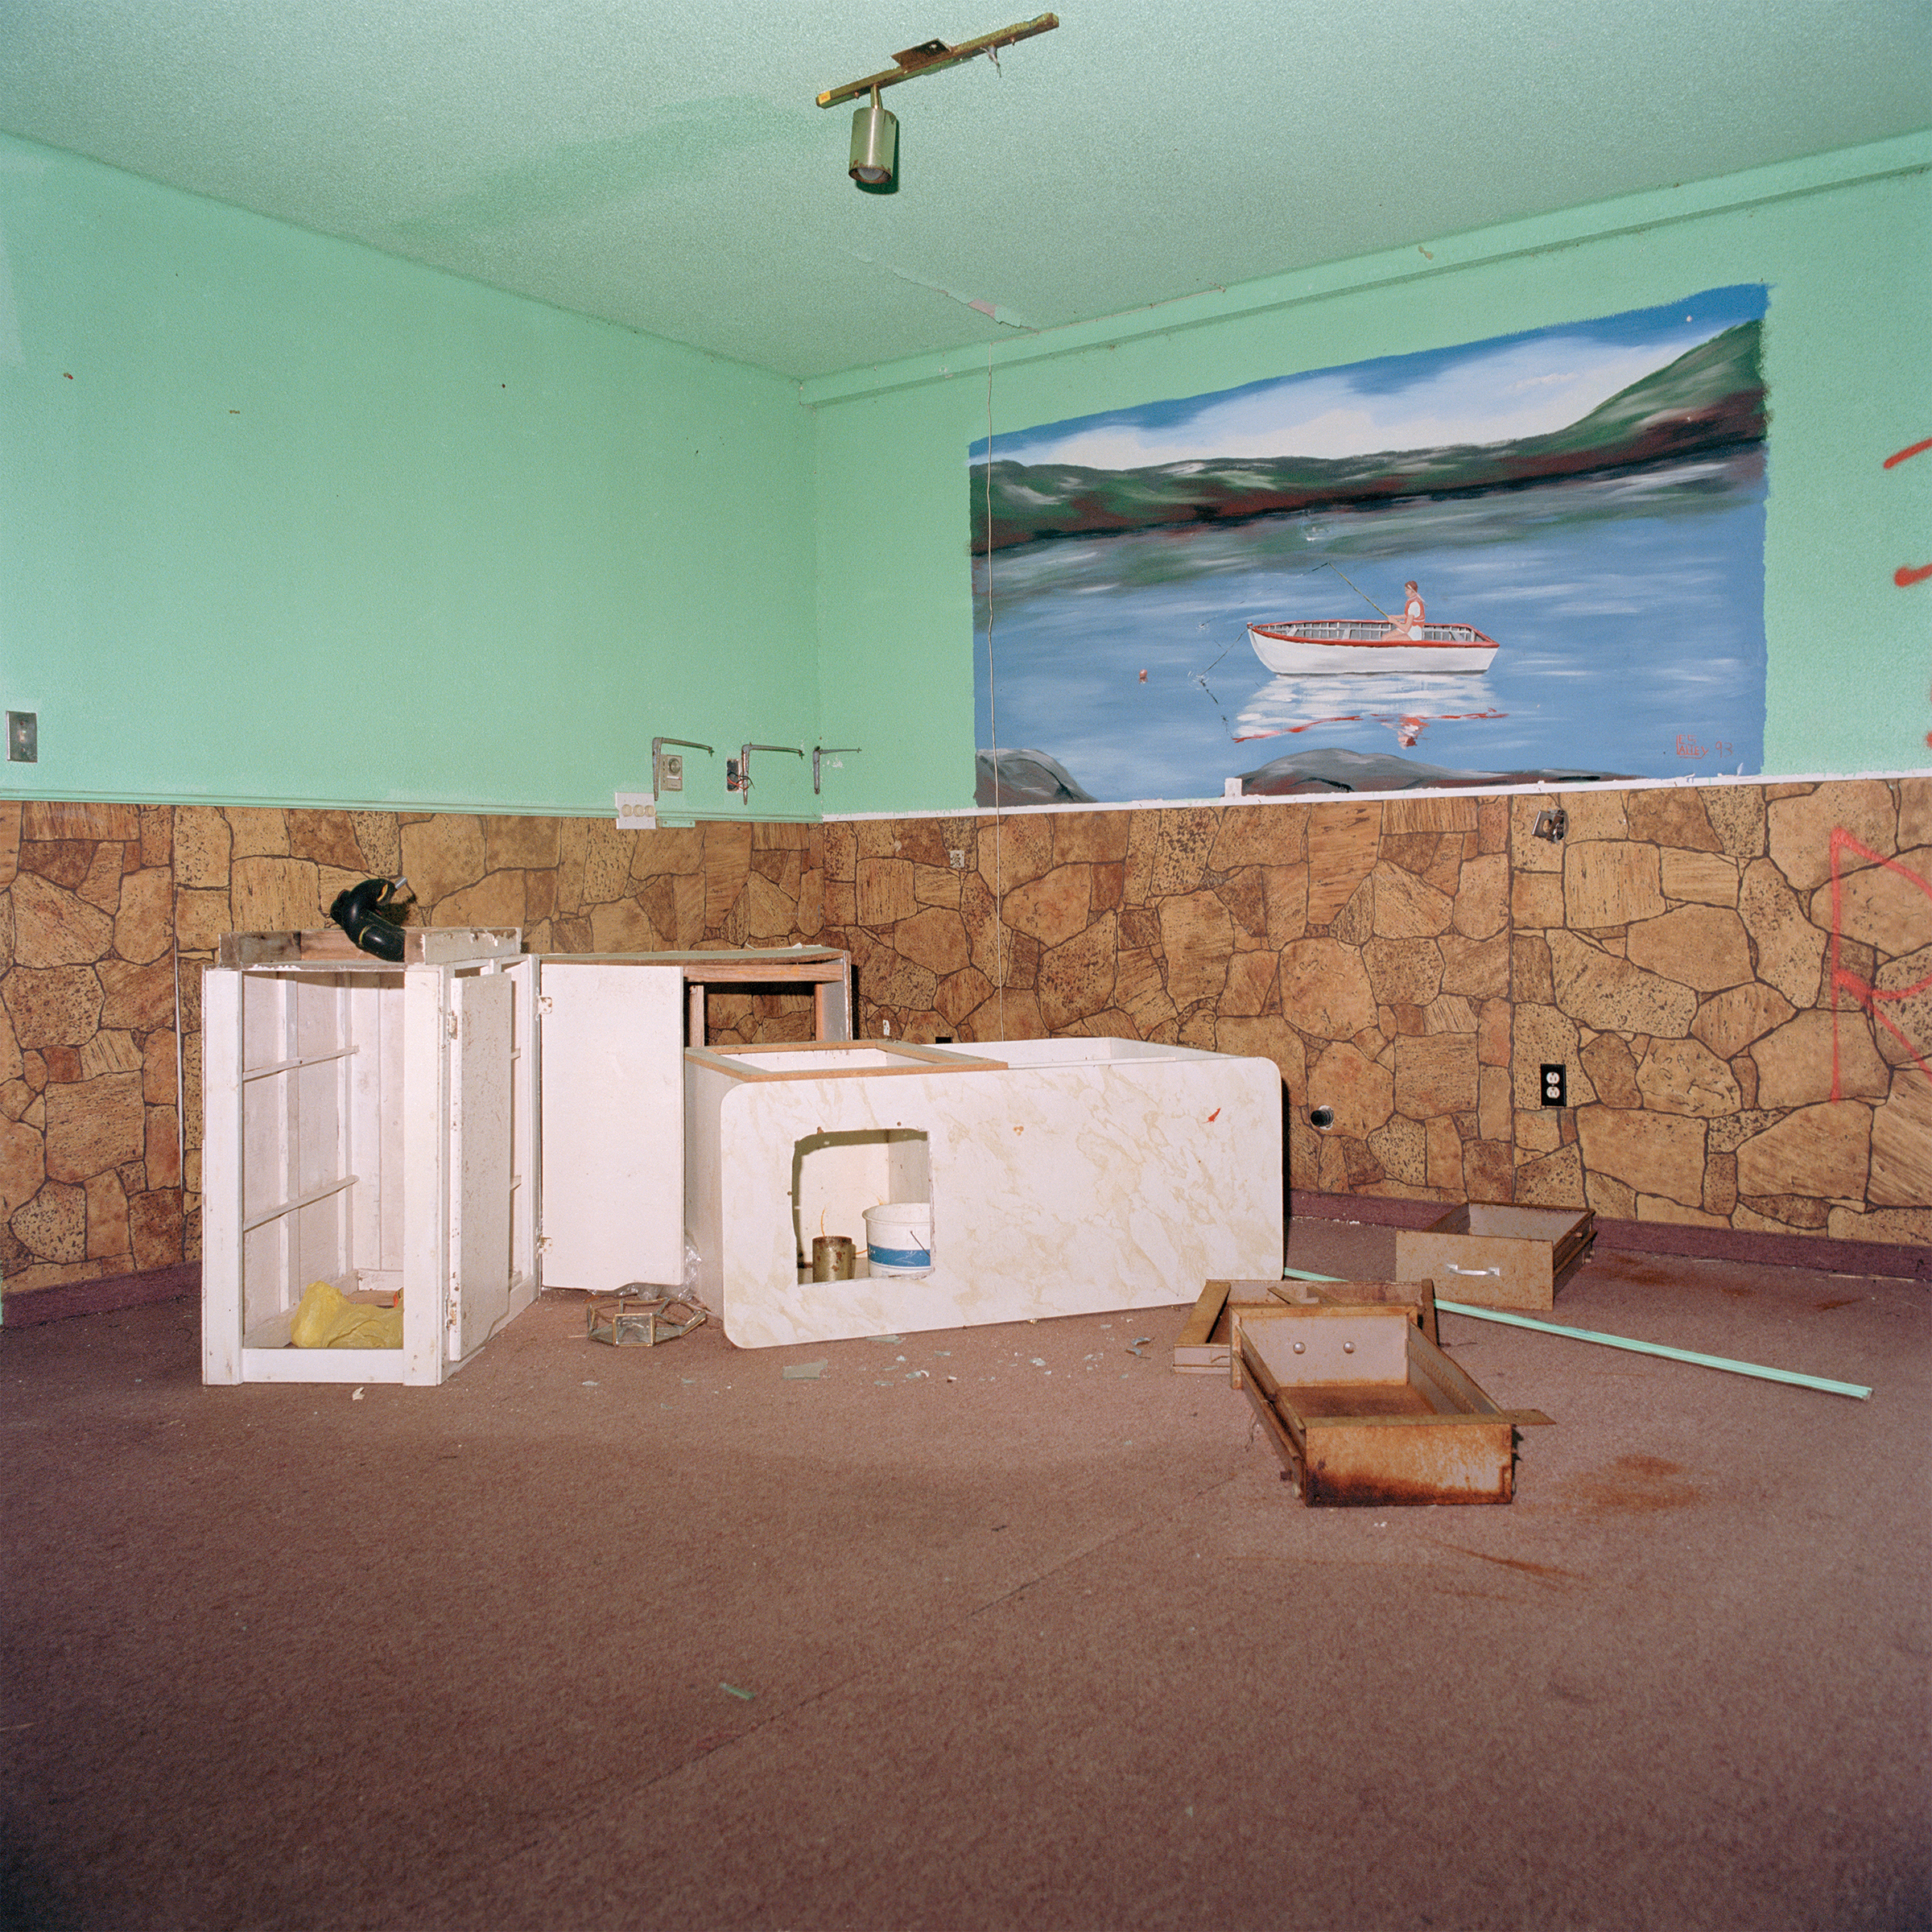     Ethan Murphy, Abandoned Room, from the series Where the Light Shines First, 2017. Courtesy of the artist

